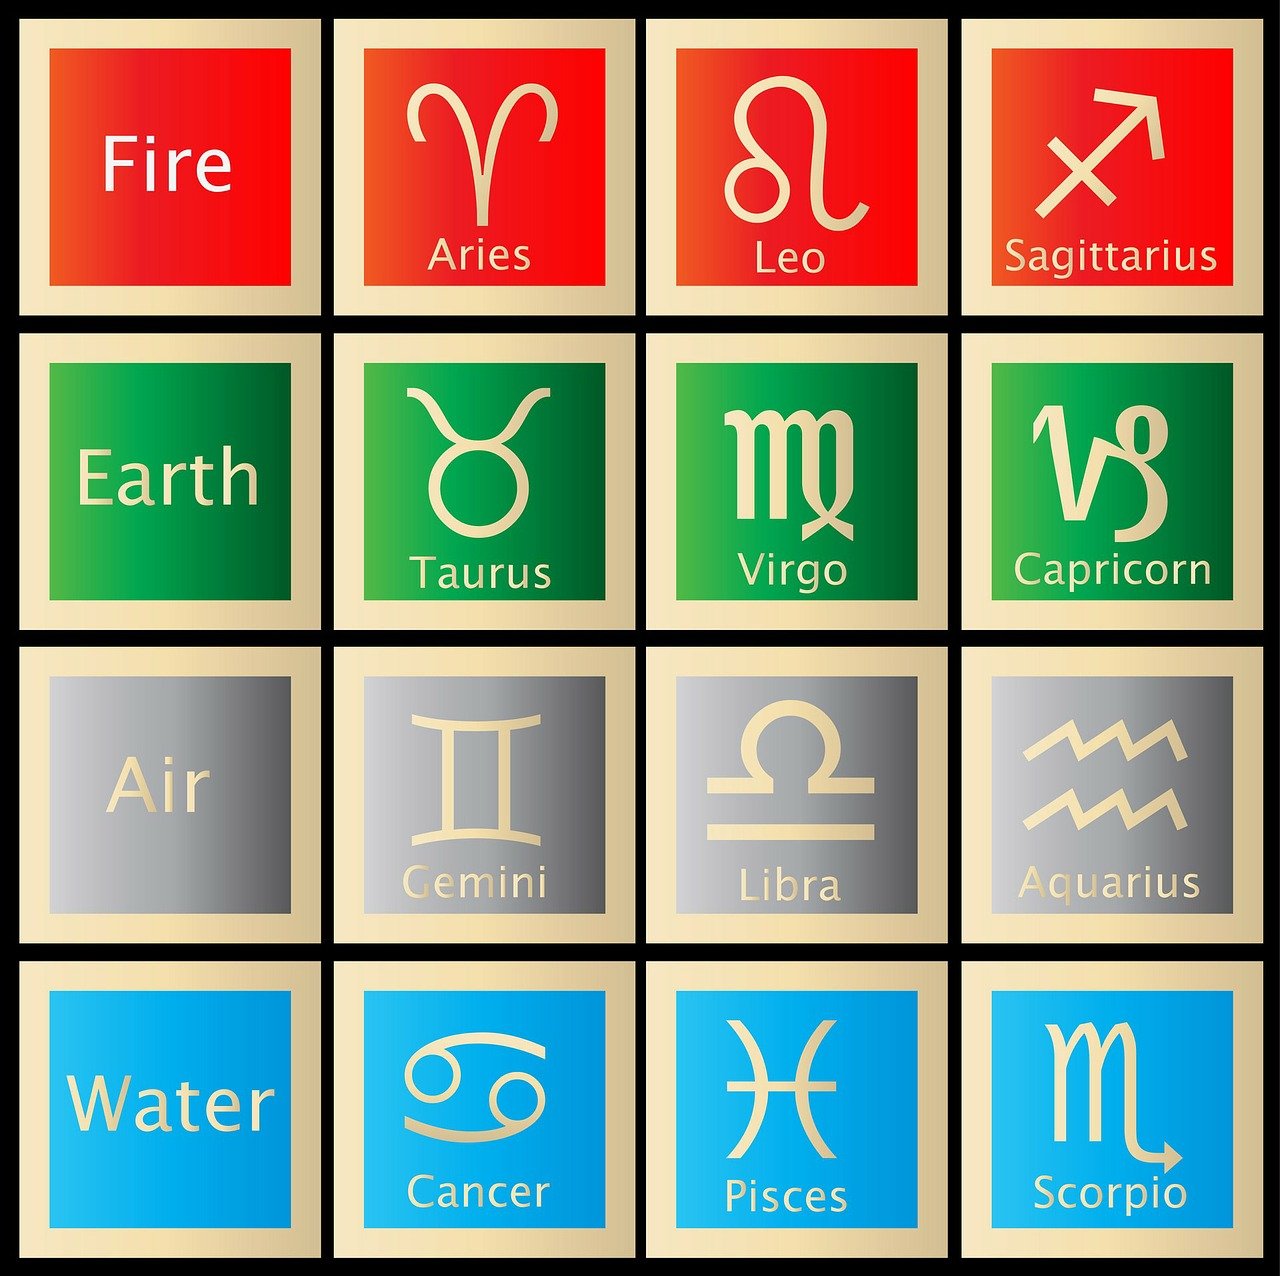 The Zodiac and Elements: 10 Facts About Fire, Water, Air, and Earth